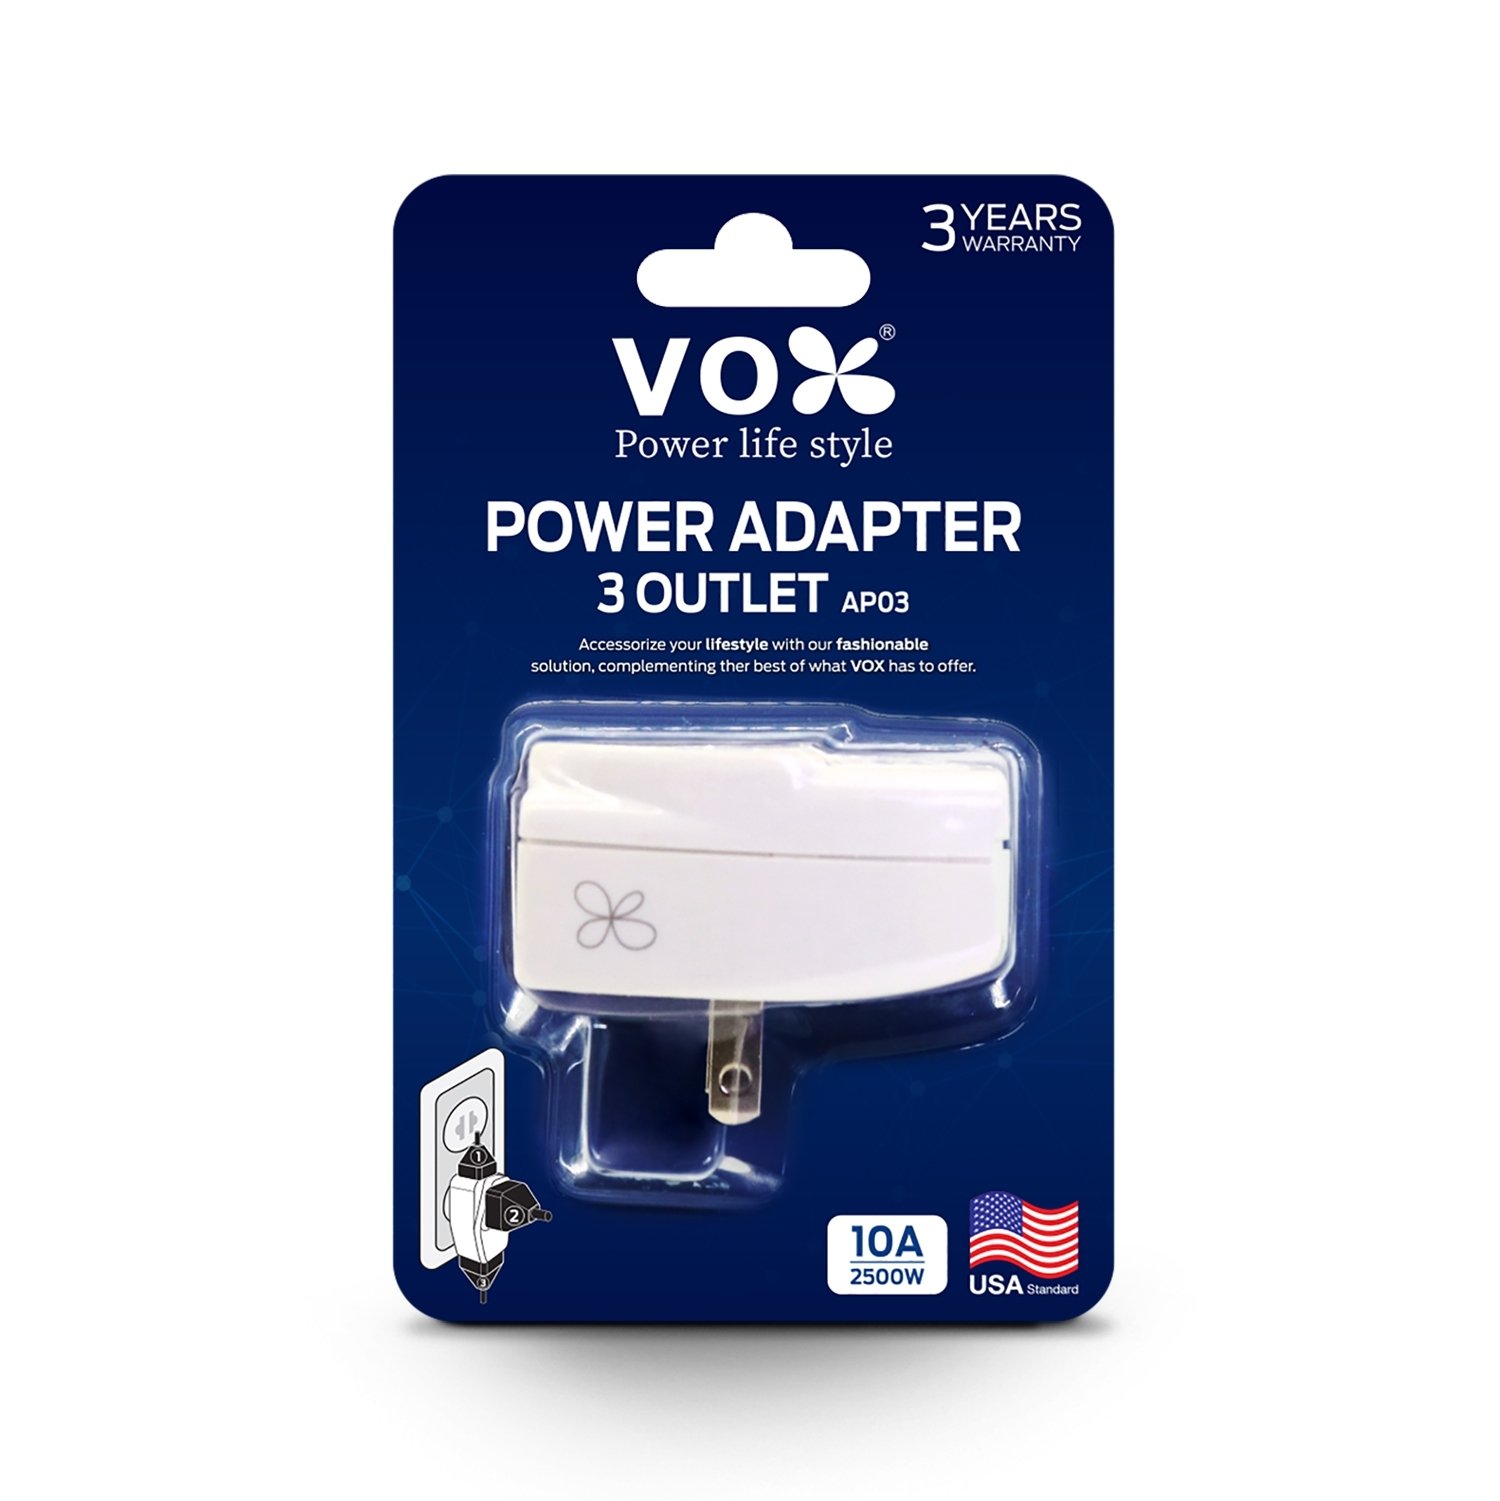 POWER ADAPTER 3 OUTLET AP03